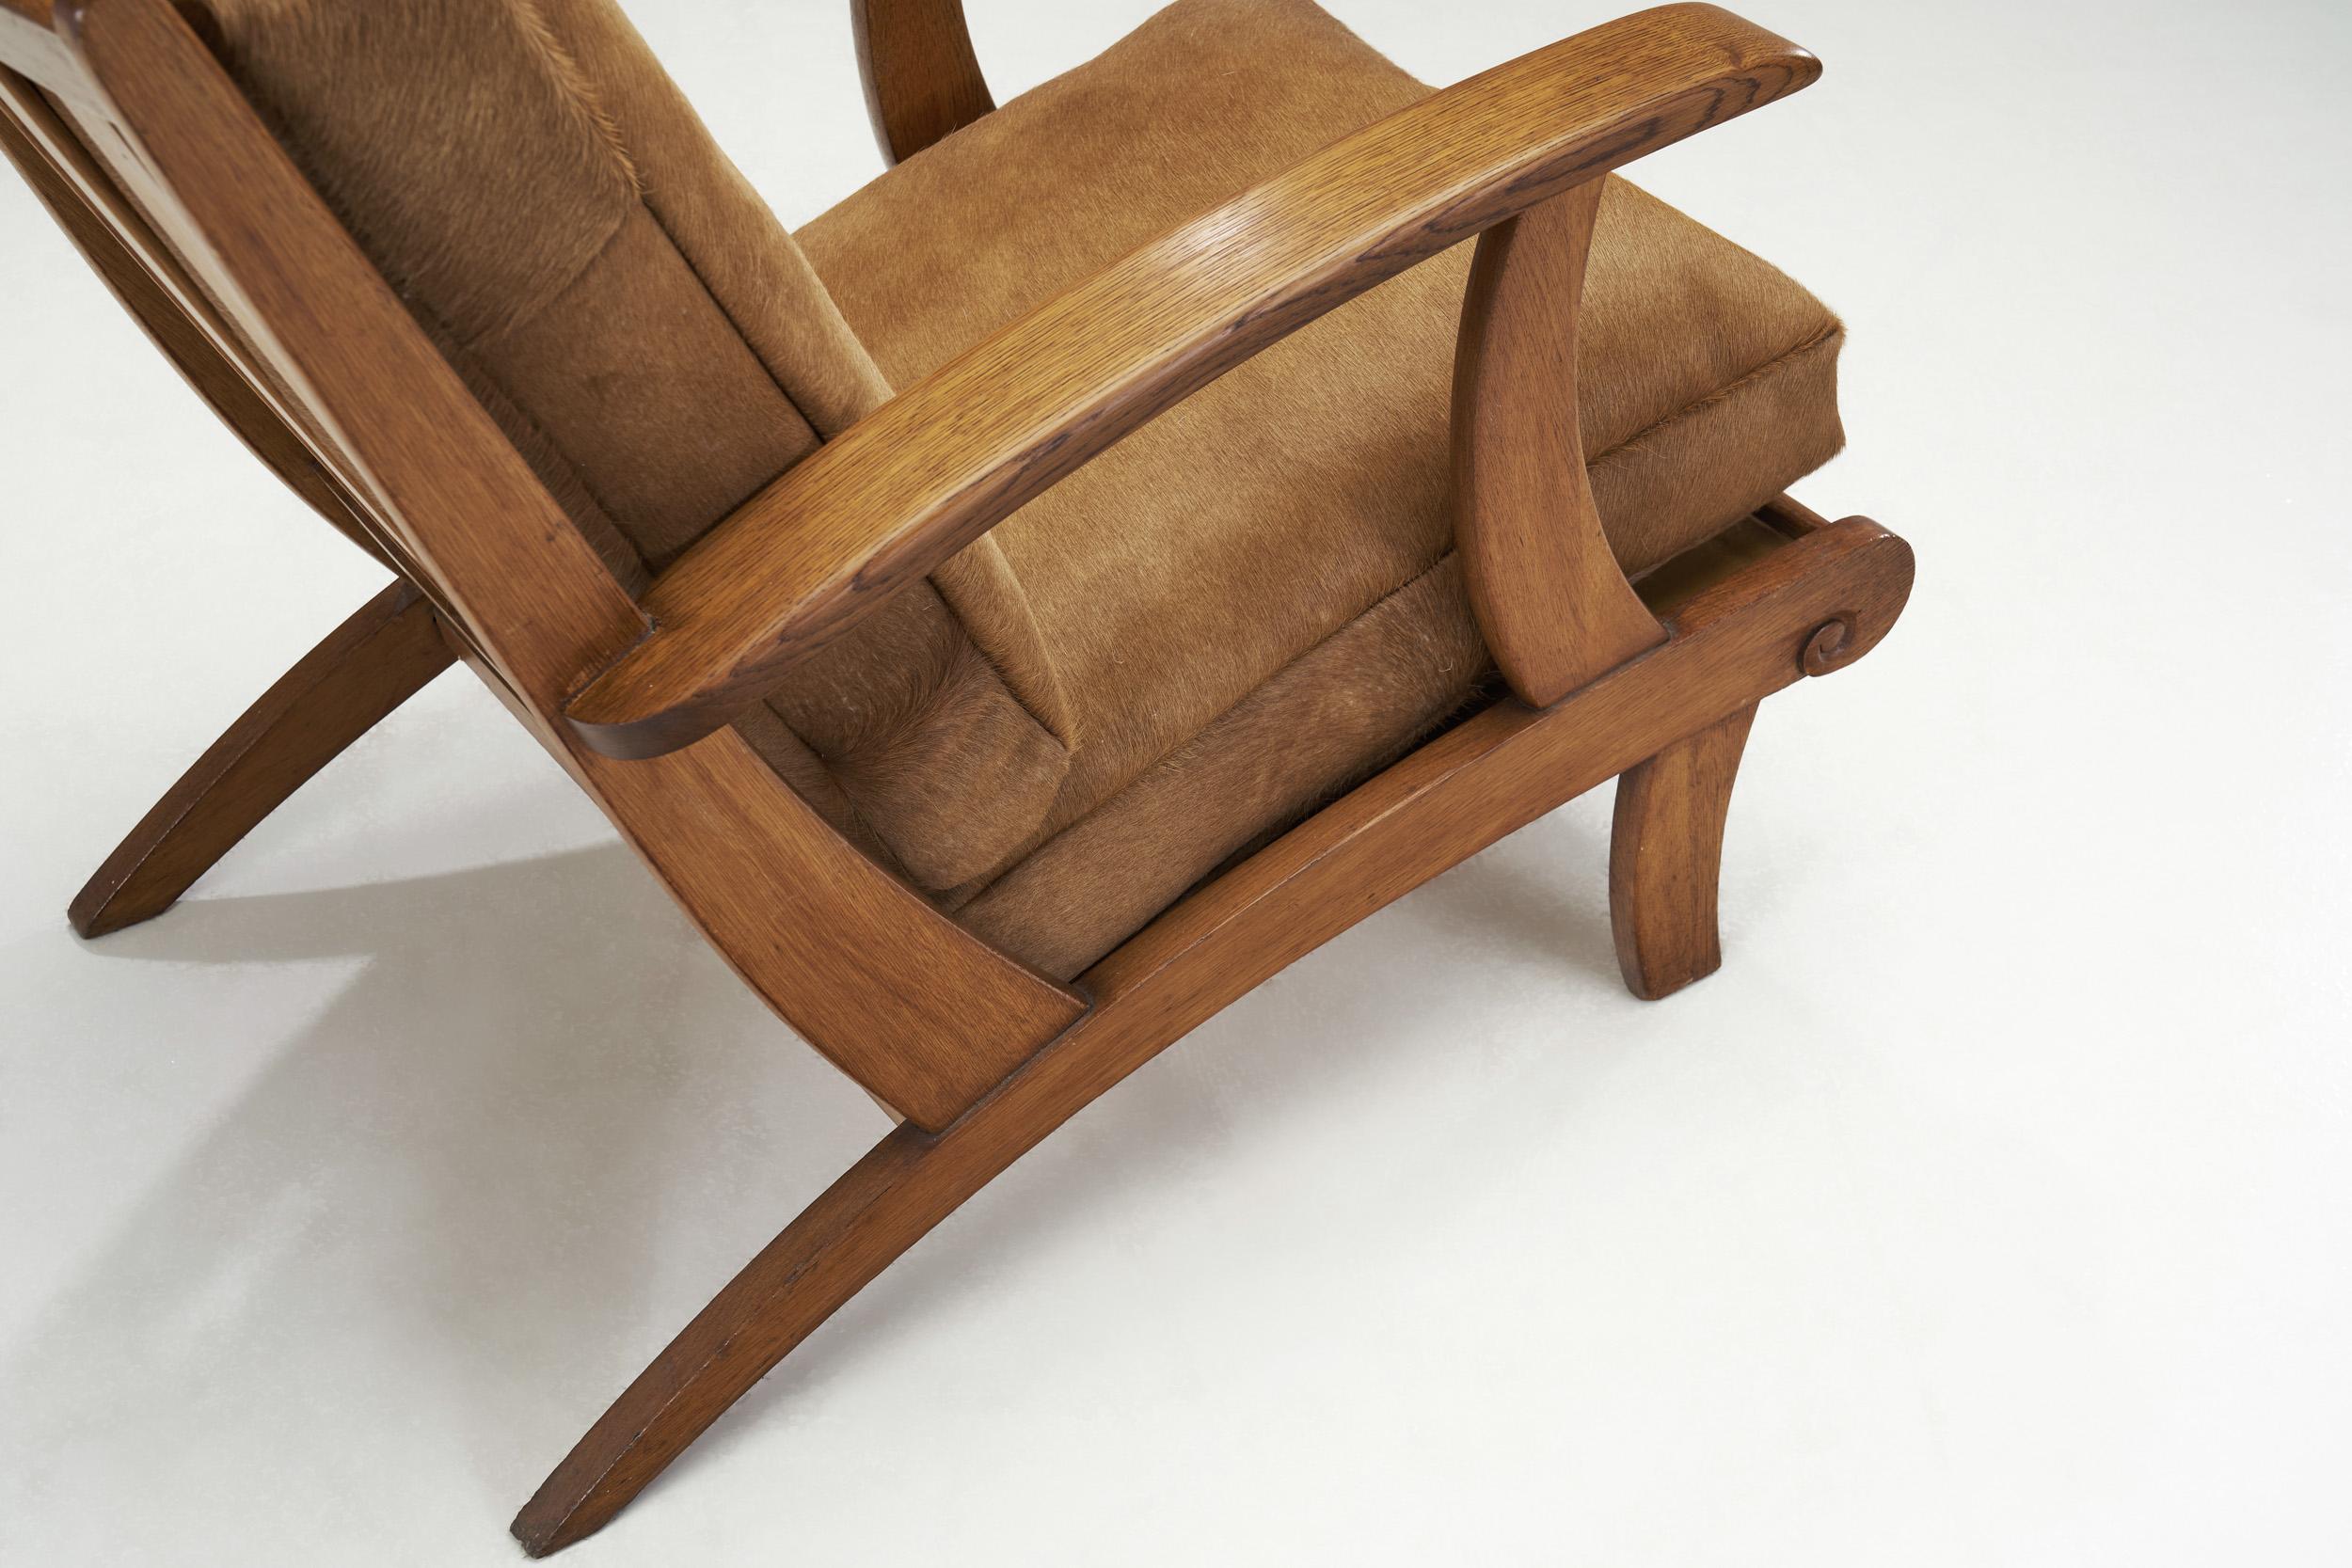 Sculptural Lounge Chair by Bas Van Pelt 'Attr.', The Netherlands, ca 1950s For Sale 6